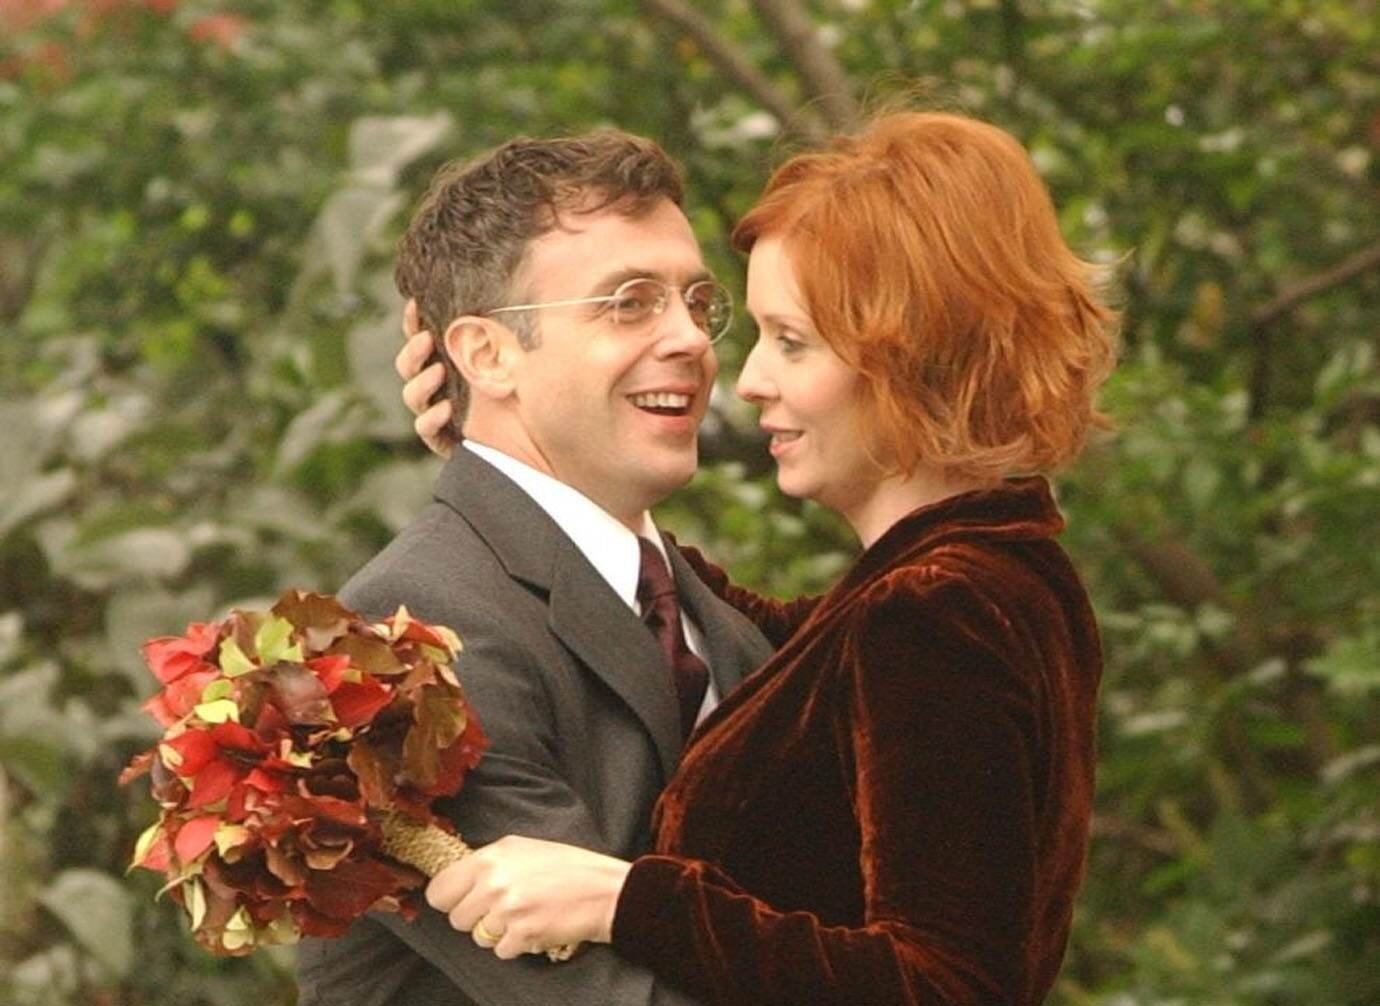 Steve Brady and Miranda Hobbes embrace at their wedding on 'Sex and the City'